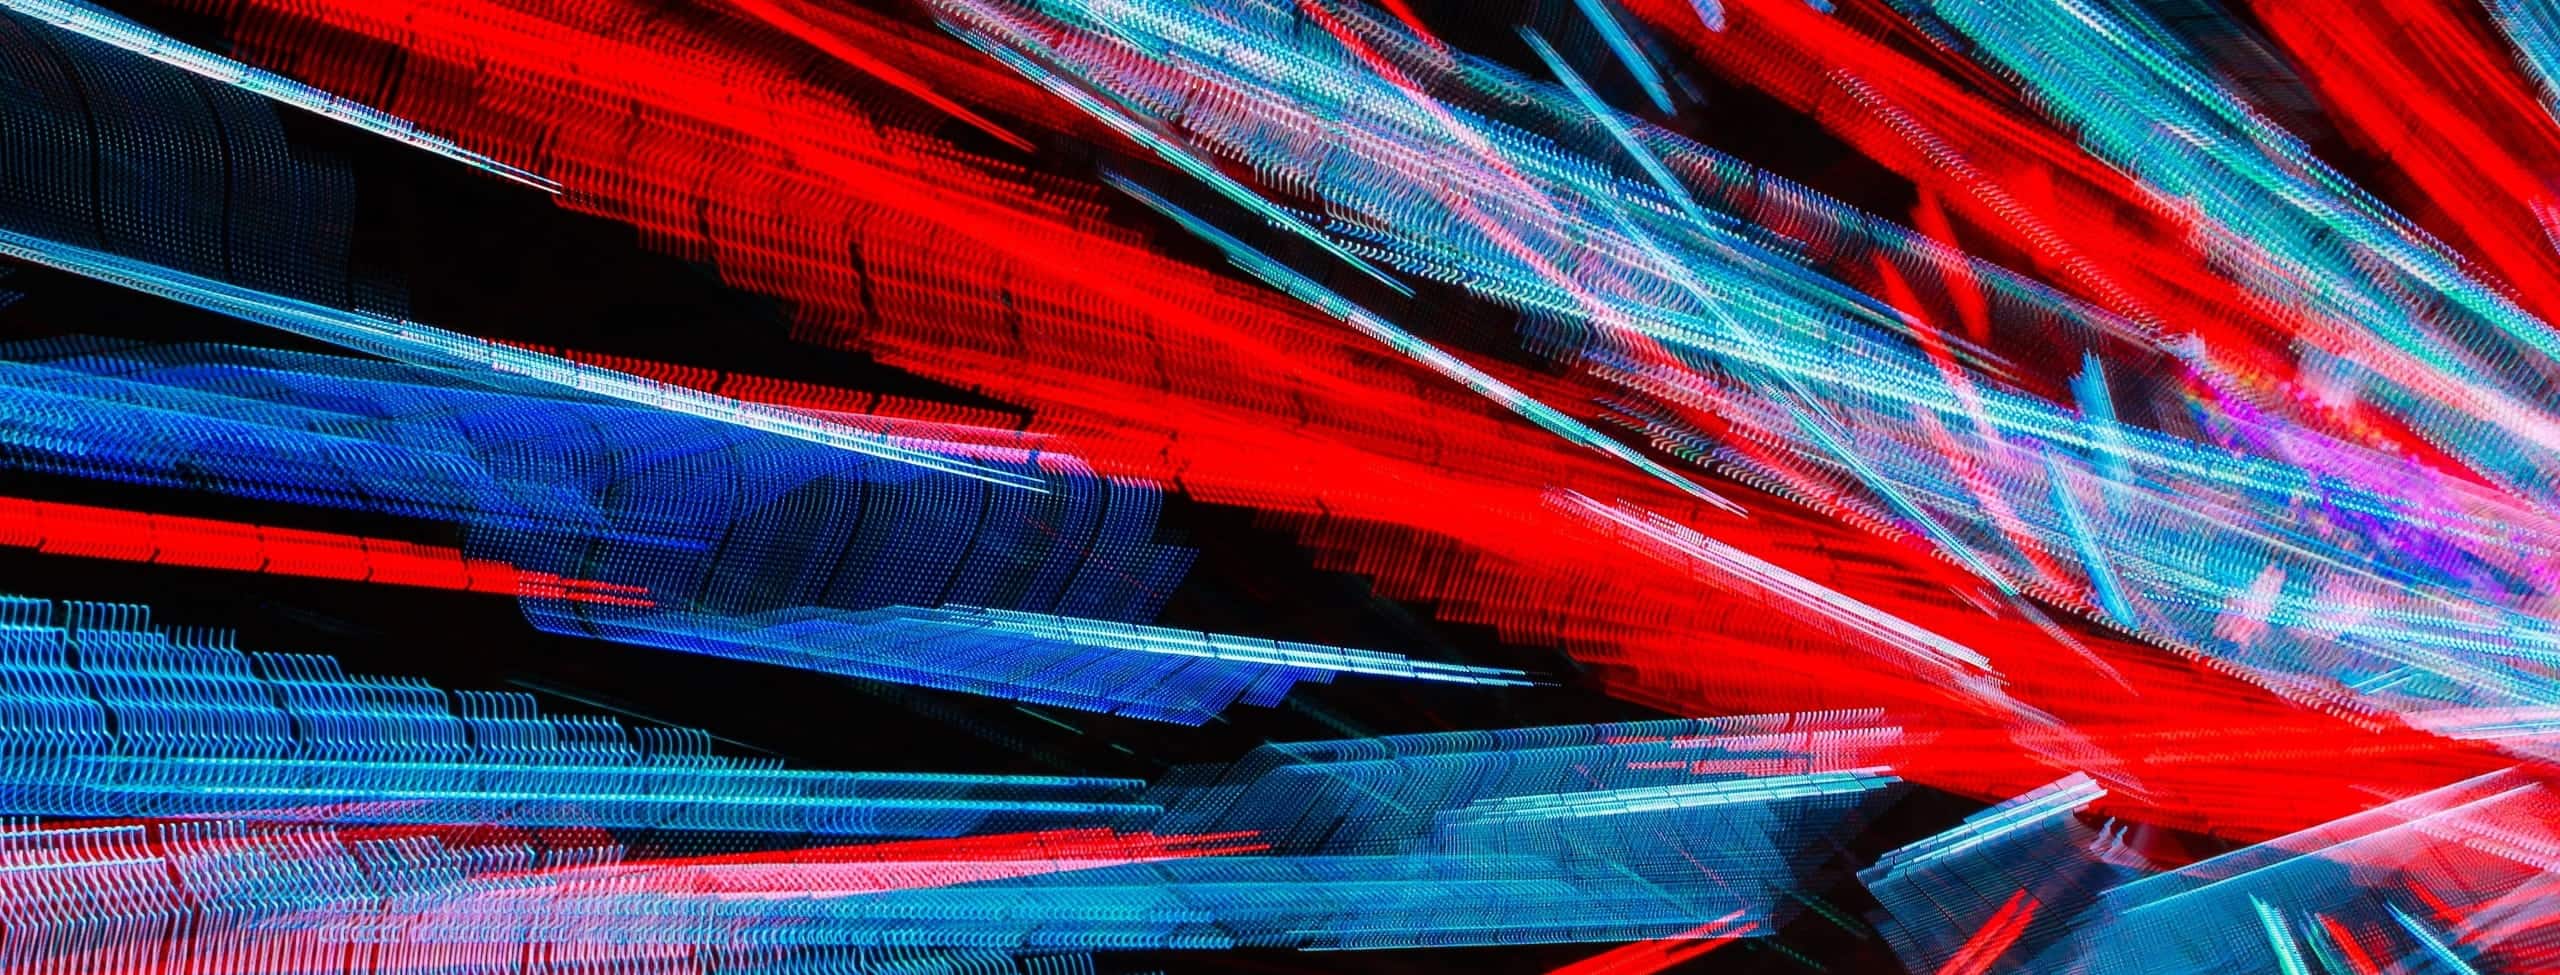 Abstract red and blue lights